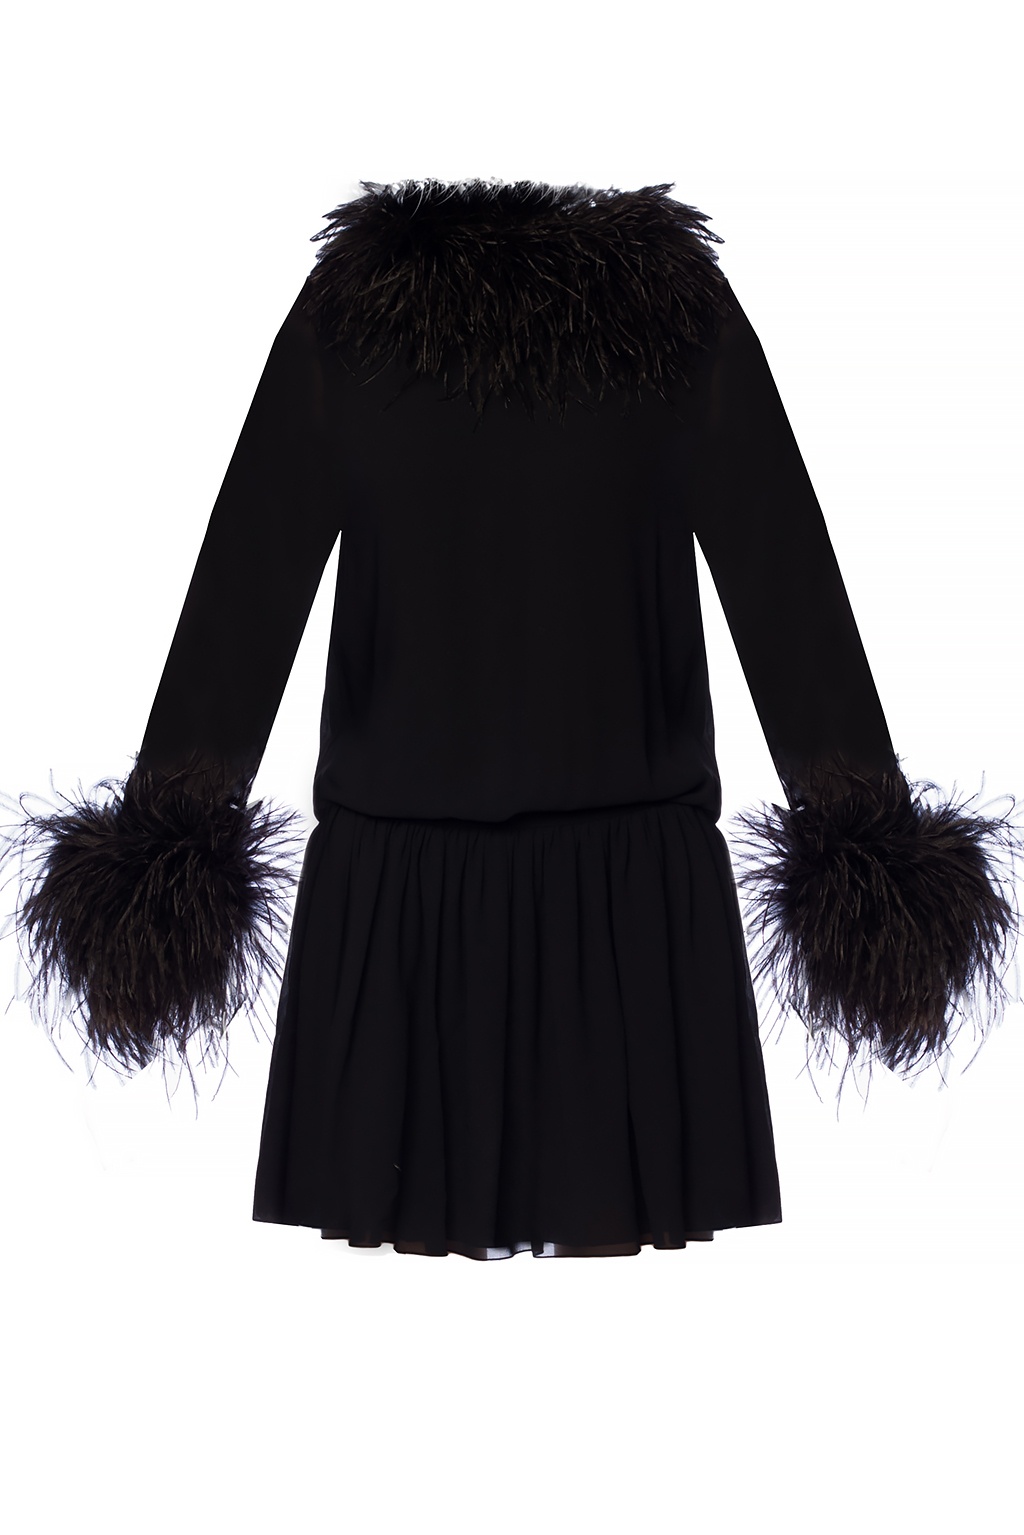 Saint Laurent Dress with ostrich feathers, Women's Clothing